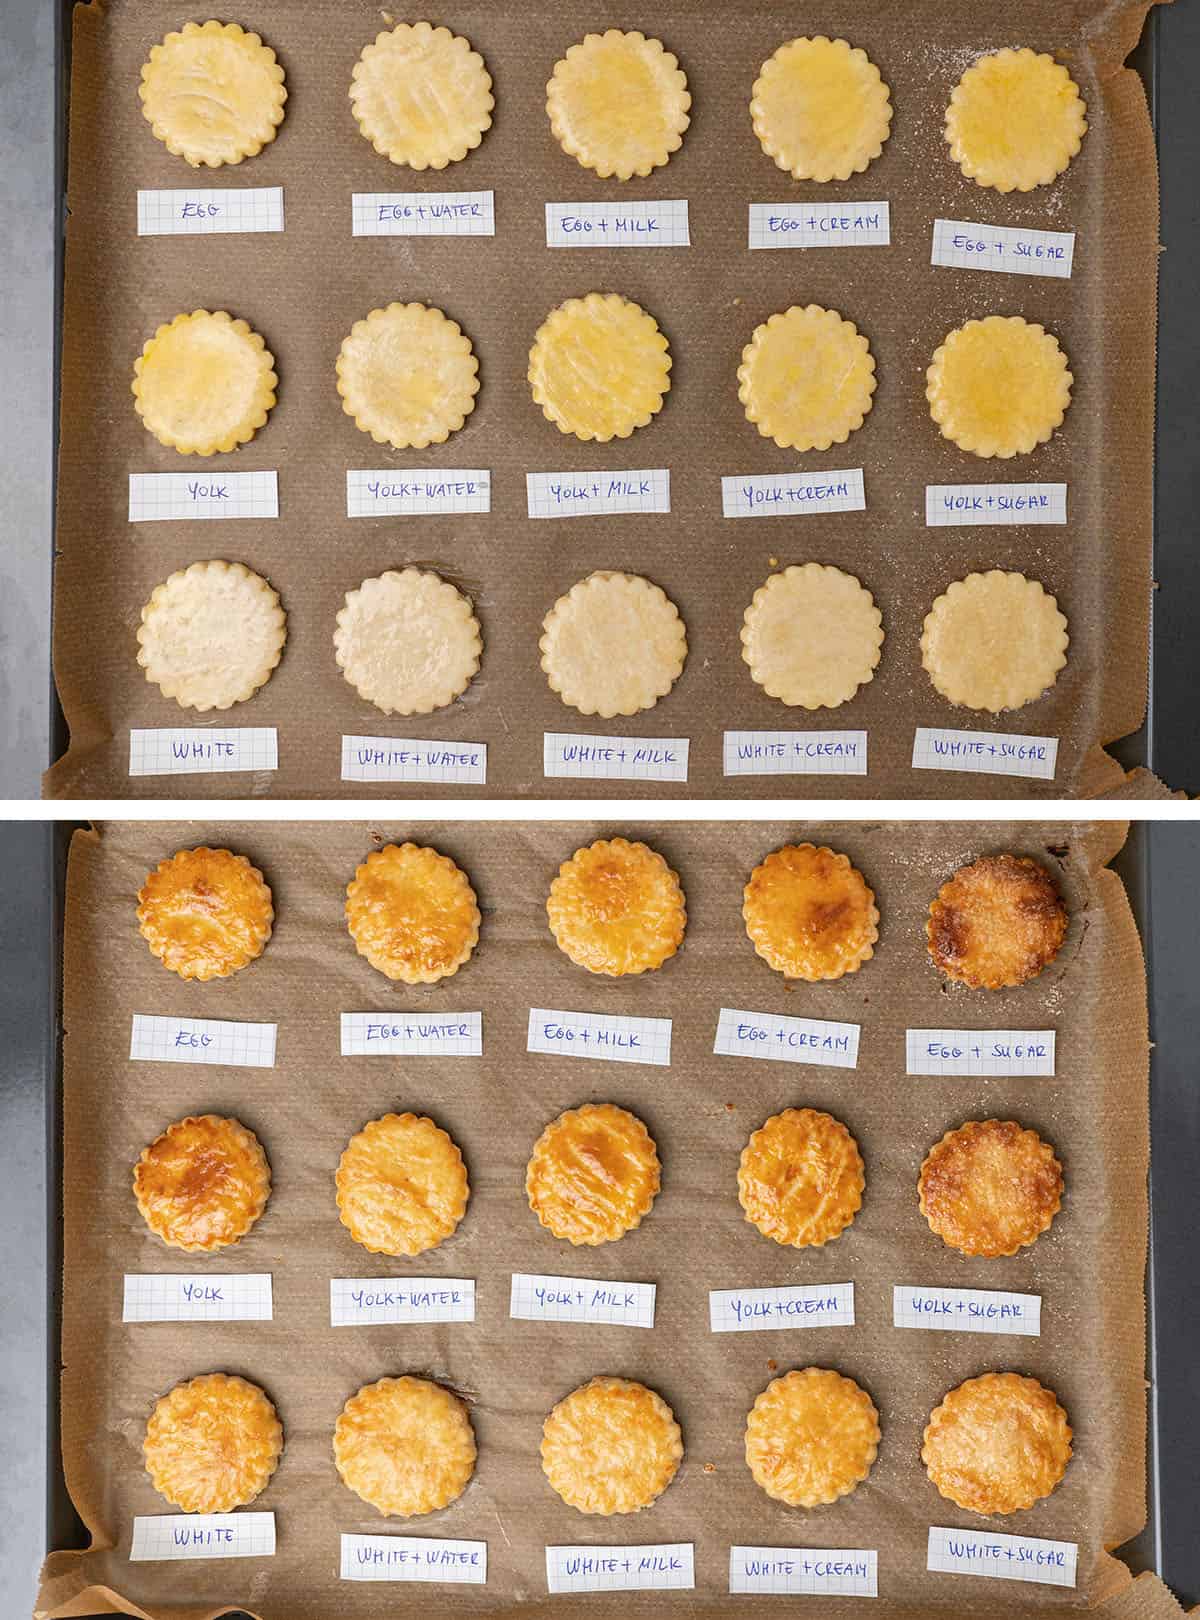 15 different type of egg wash before and after baking.